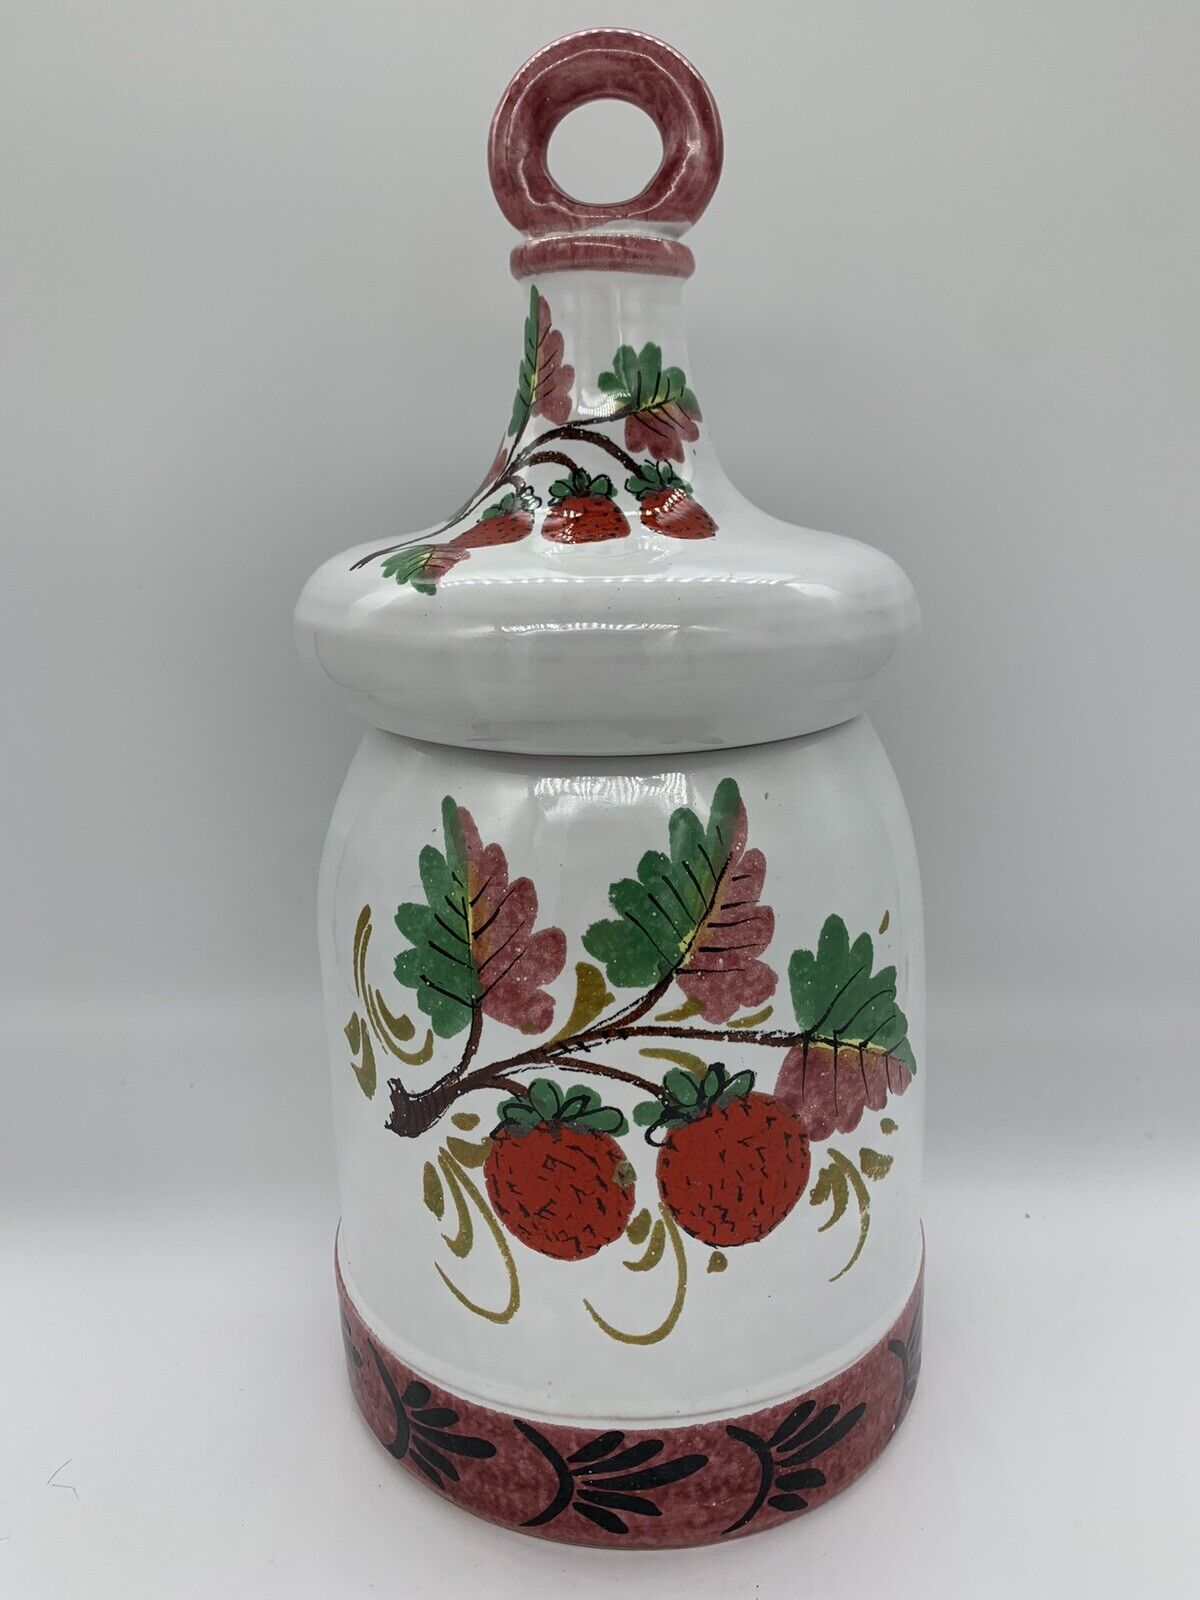 Rare vintage made in Italy and painted strawberry biscotti/cookie jar